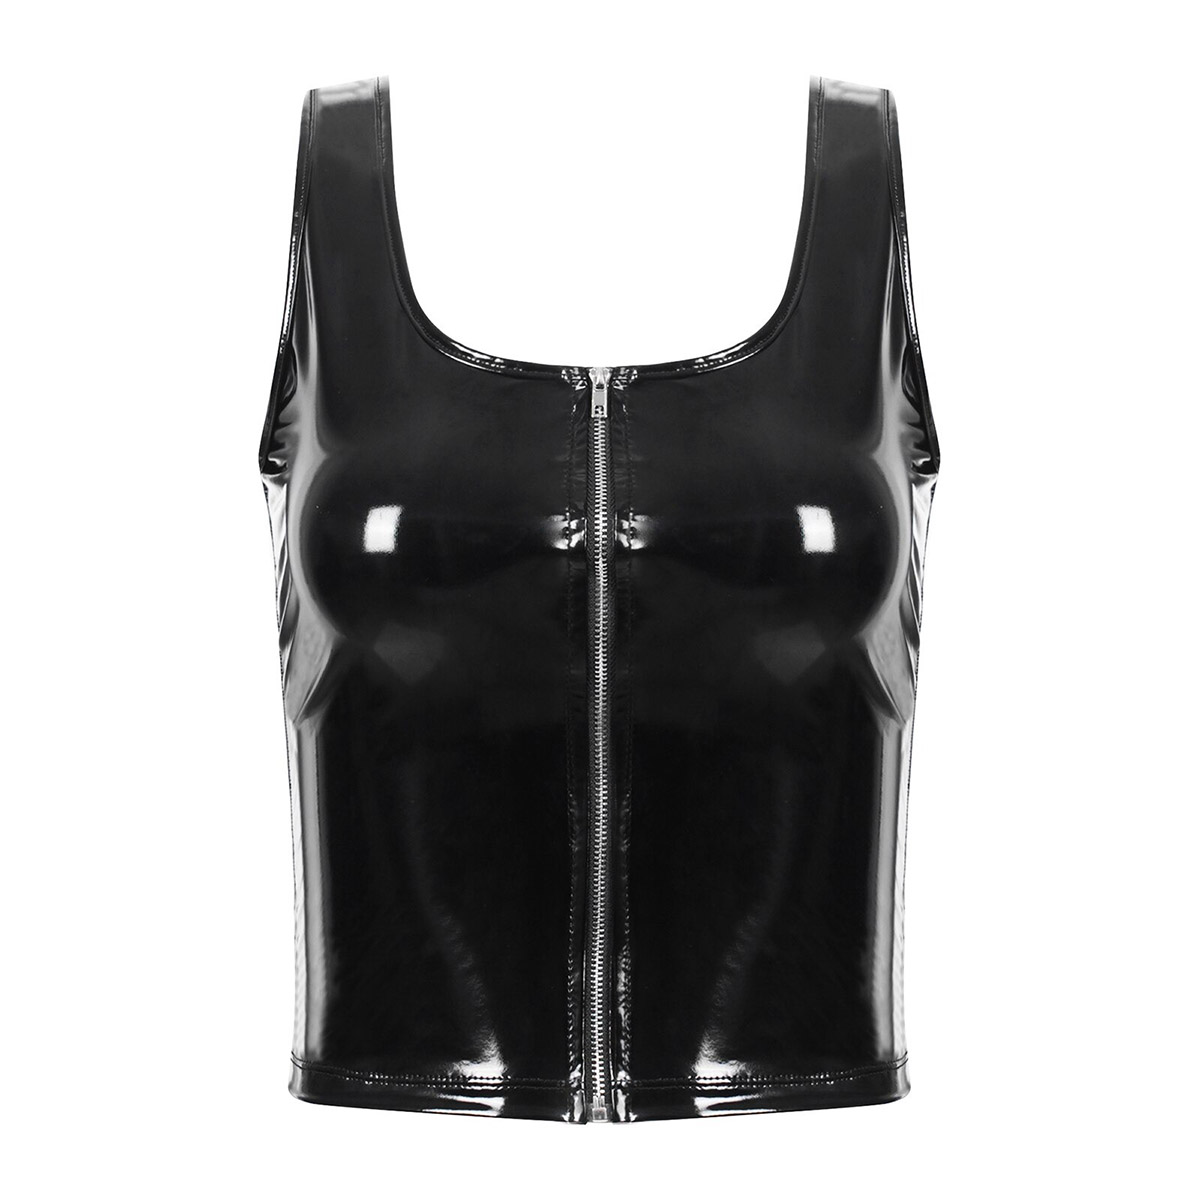 Women's Fashion Patent Leather Tank Top with Zipper / U Neck Sleeveless Tops for Pole Dancing - HARD'N'HEAVY